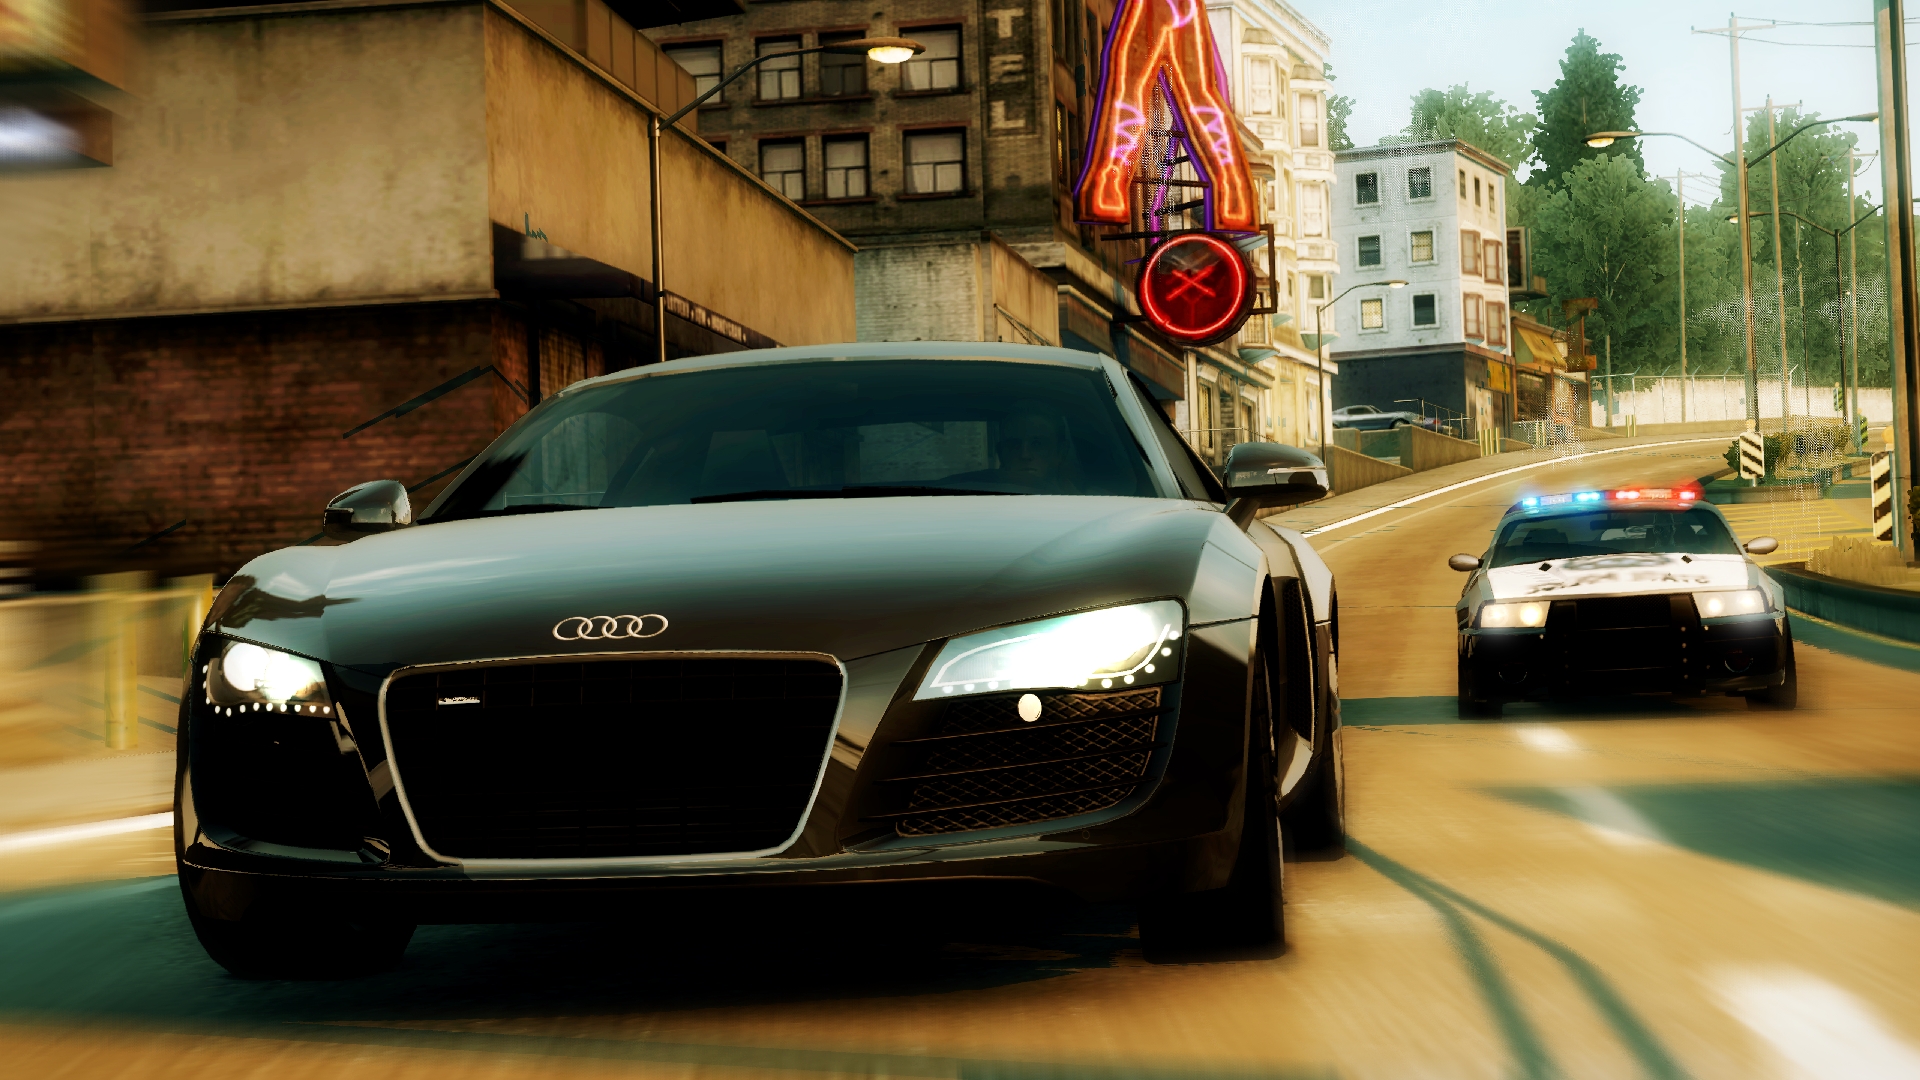 Need For Speed - Need For Speed Undercover Audi R8 - HD Wallpaper 